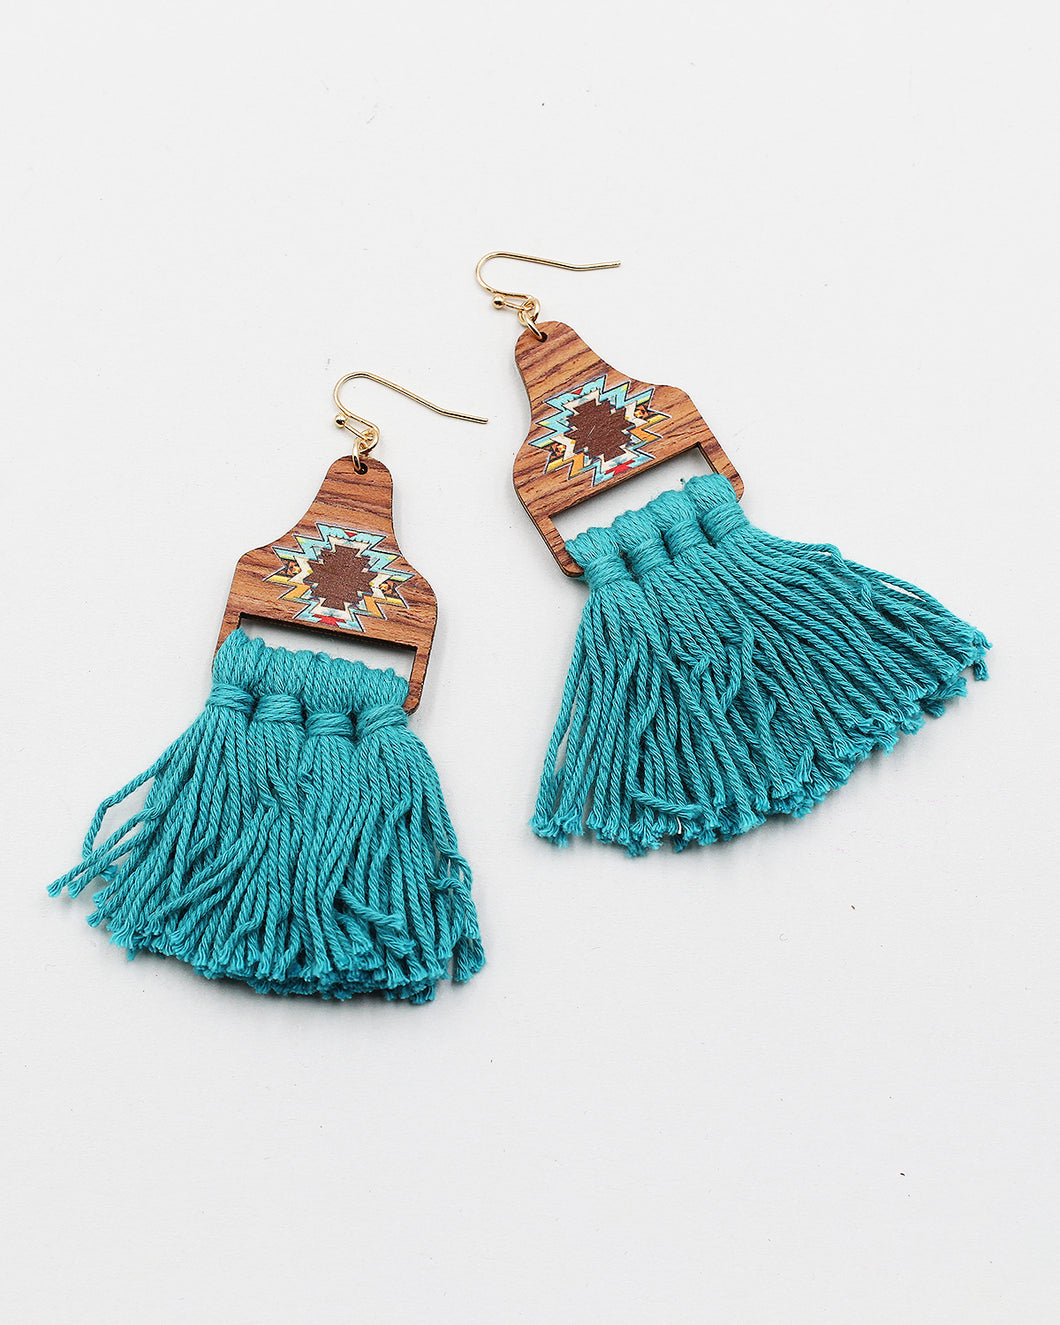 Western Wood Top Earrings with Cotton Fringe